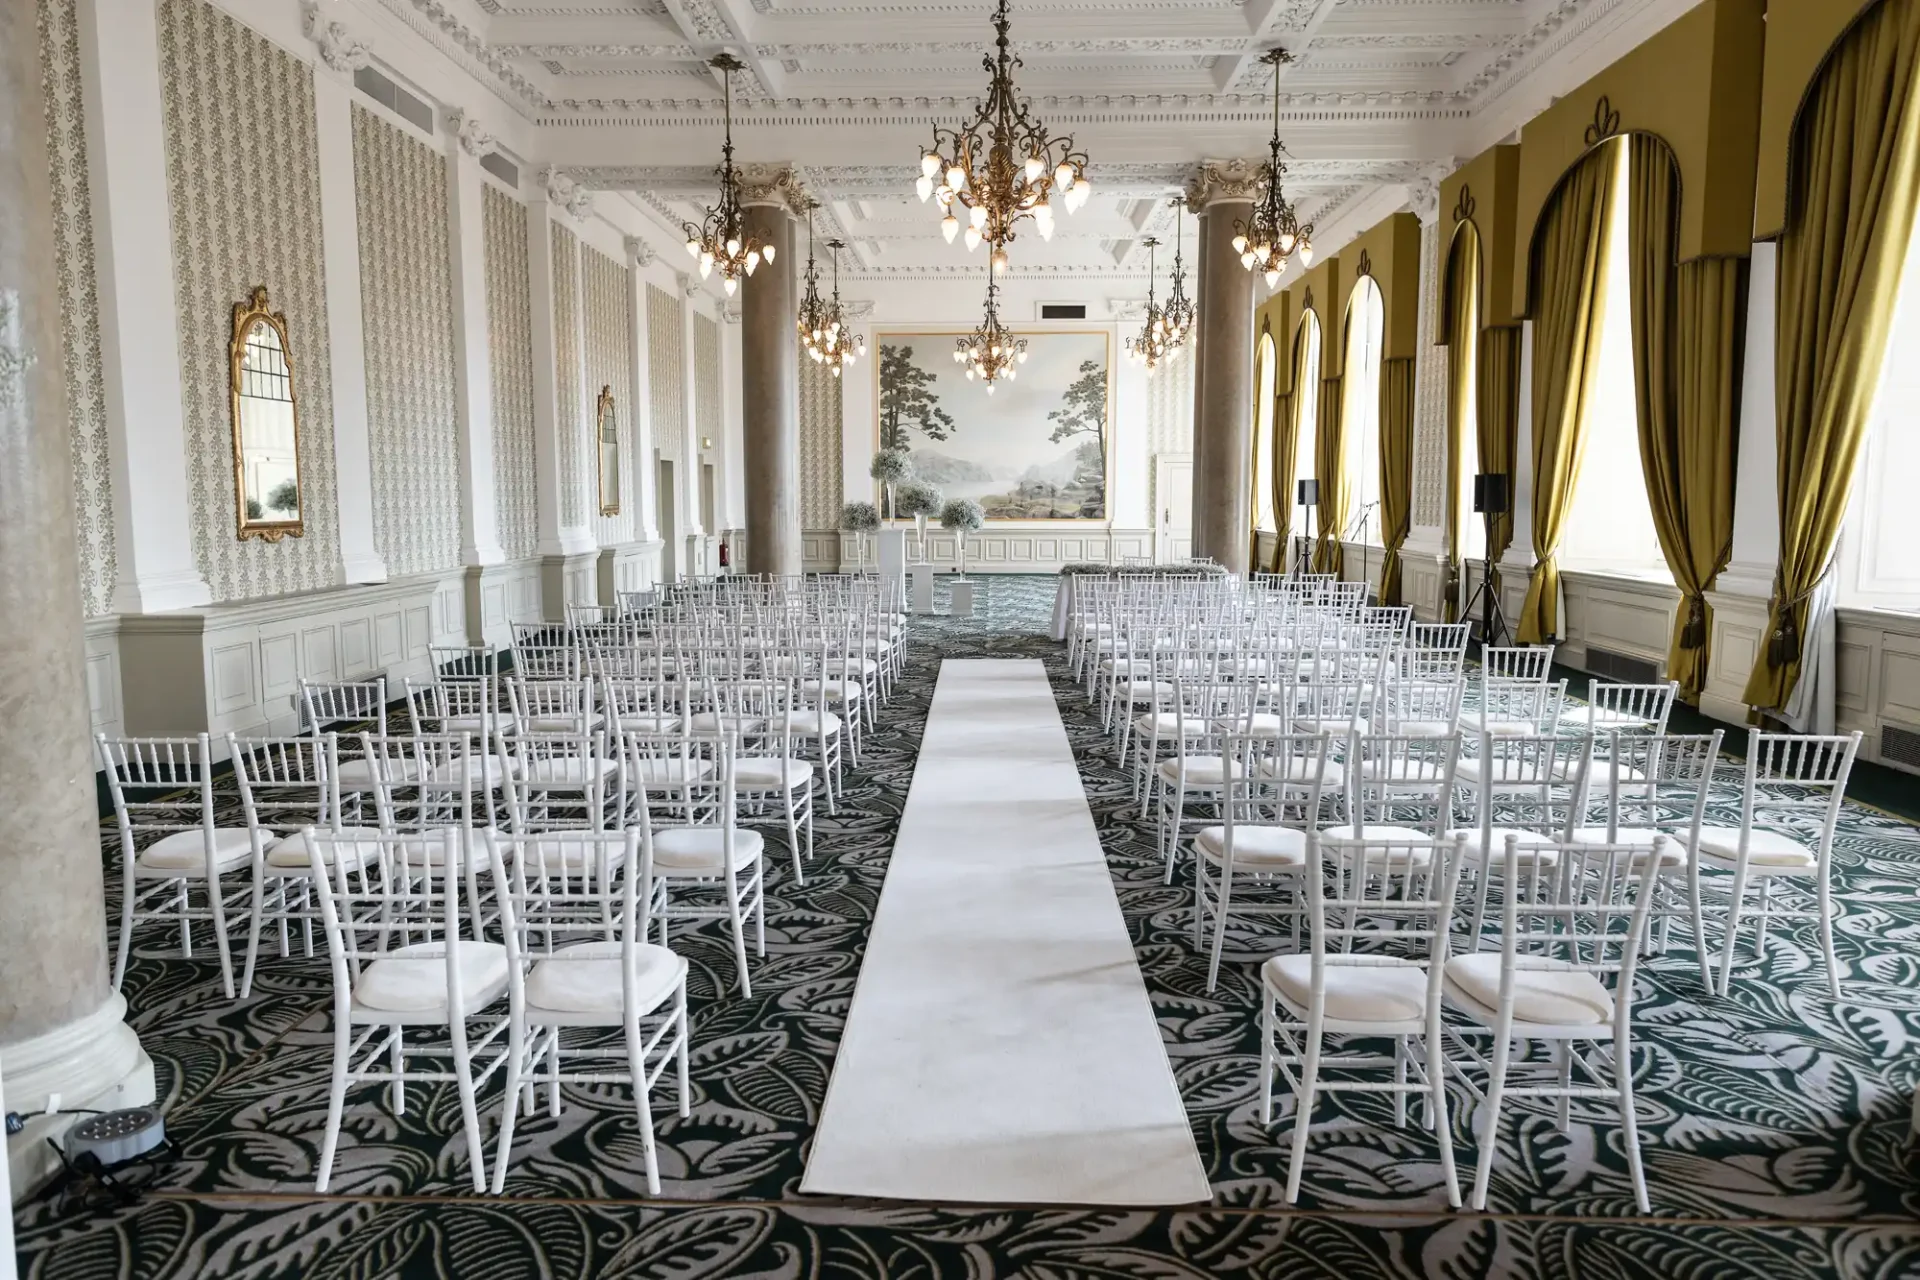 Elegant wedding venue with rows of white chairs arranged on either side of a long white aisle runner, leading to a large window, in a room with ornate chandeliers and drapery.